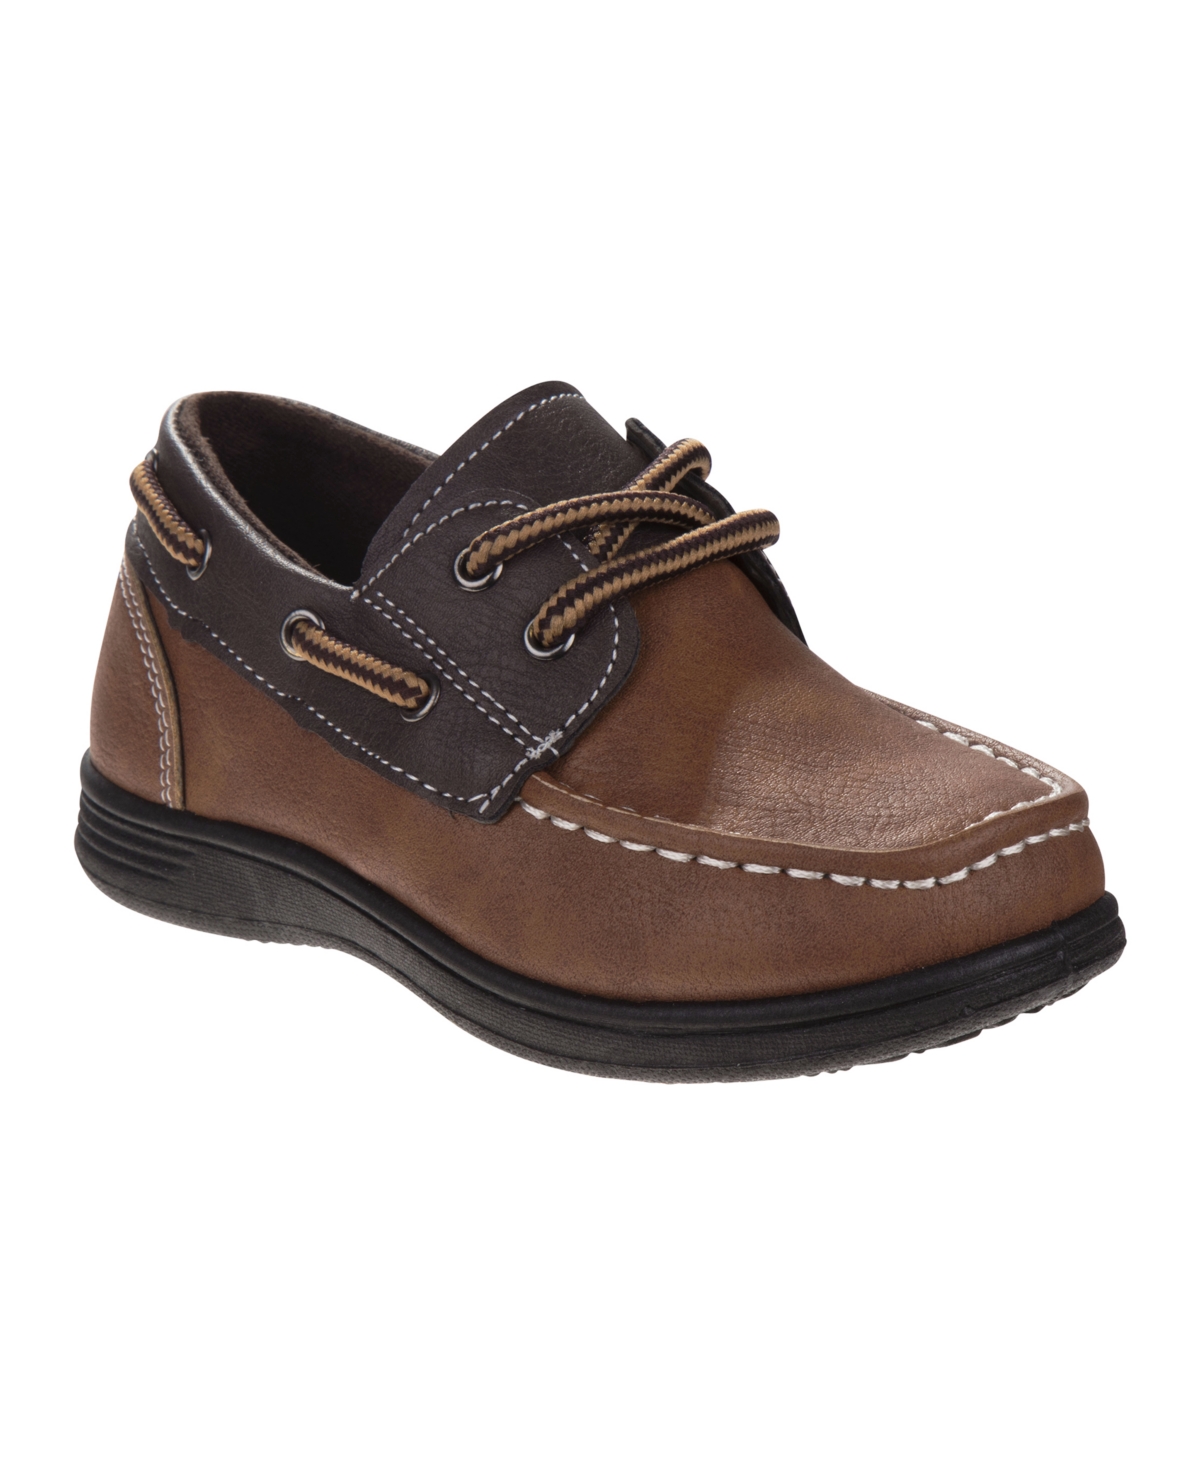 Josmo Kids' Little Boys Boat Style Casual Shoes In Tan,brown